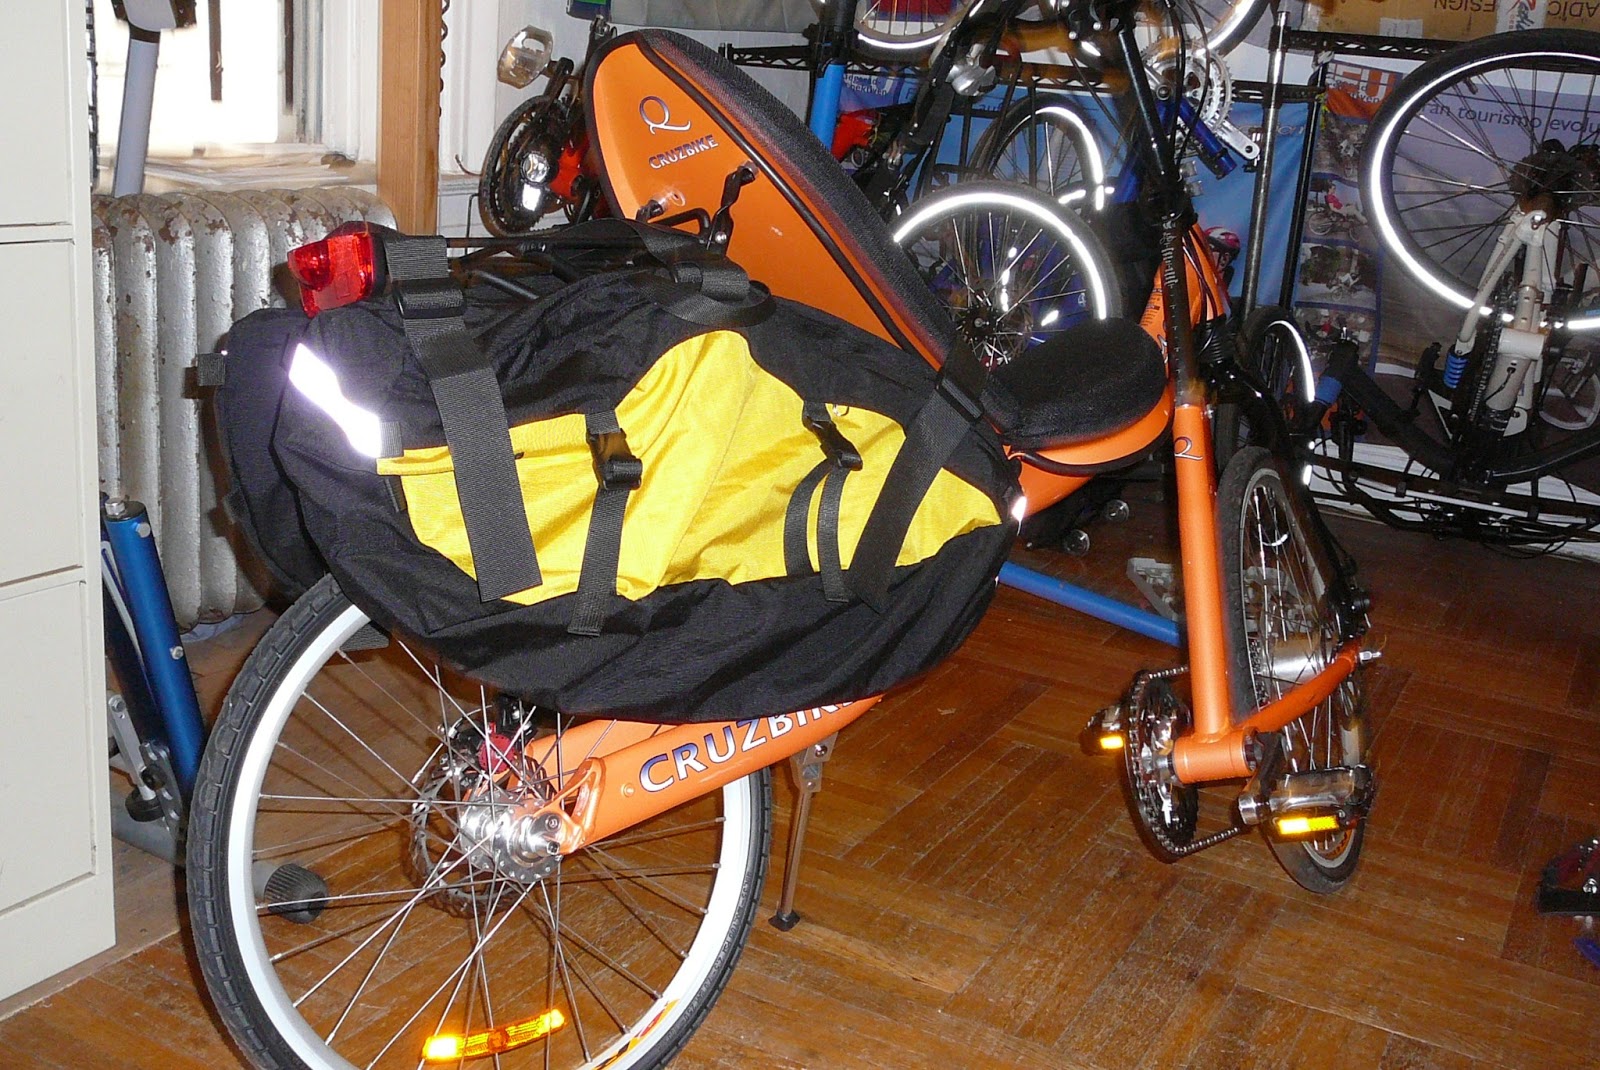 Recumbent bikology in the urban jungle.: Panniers and bags for Cruzbike ...